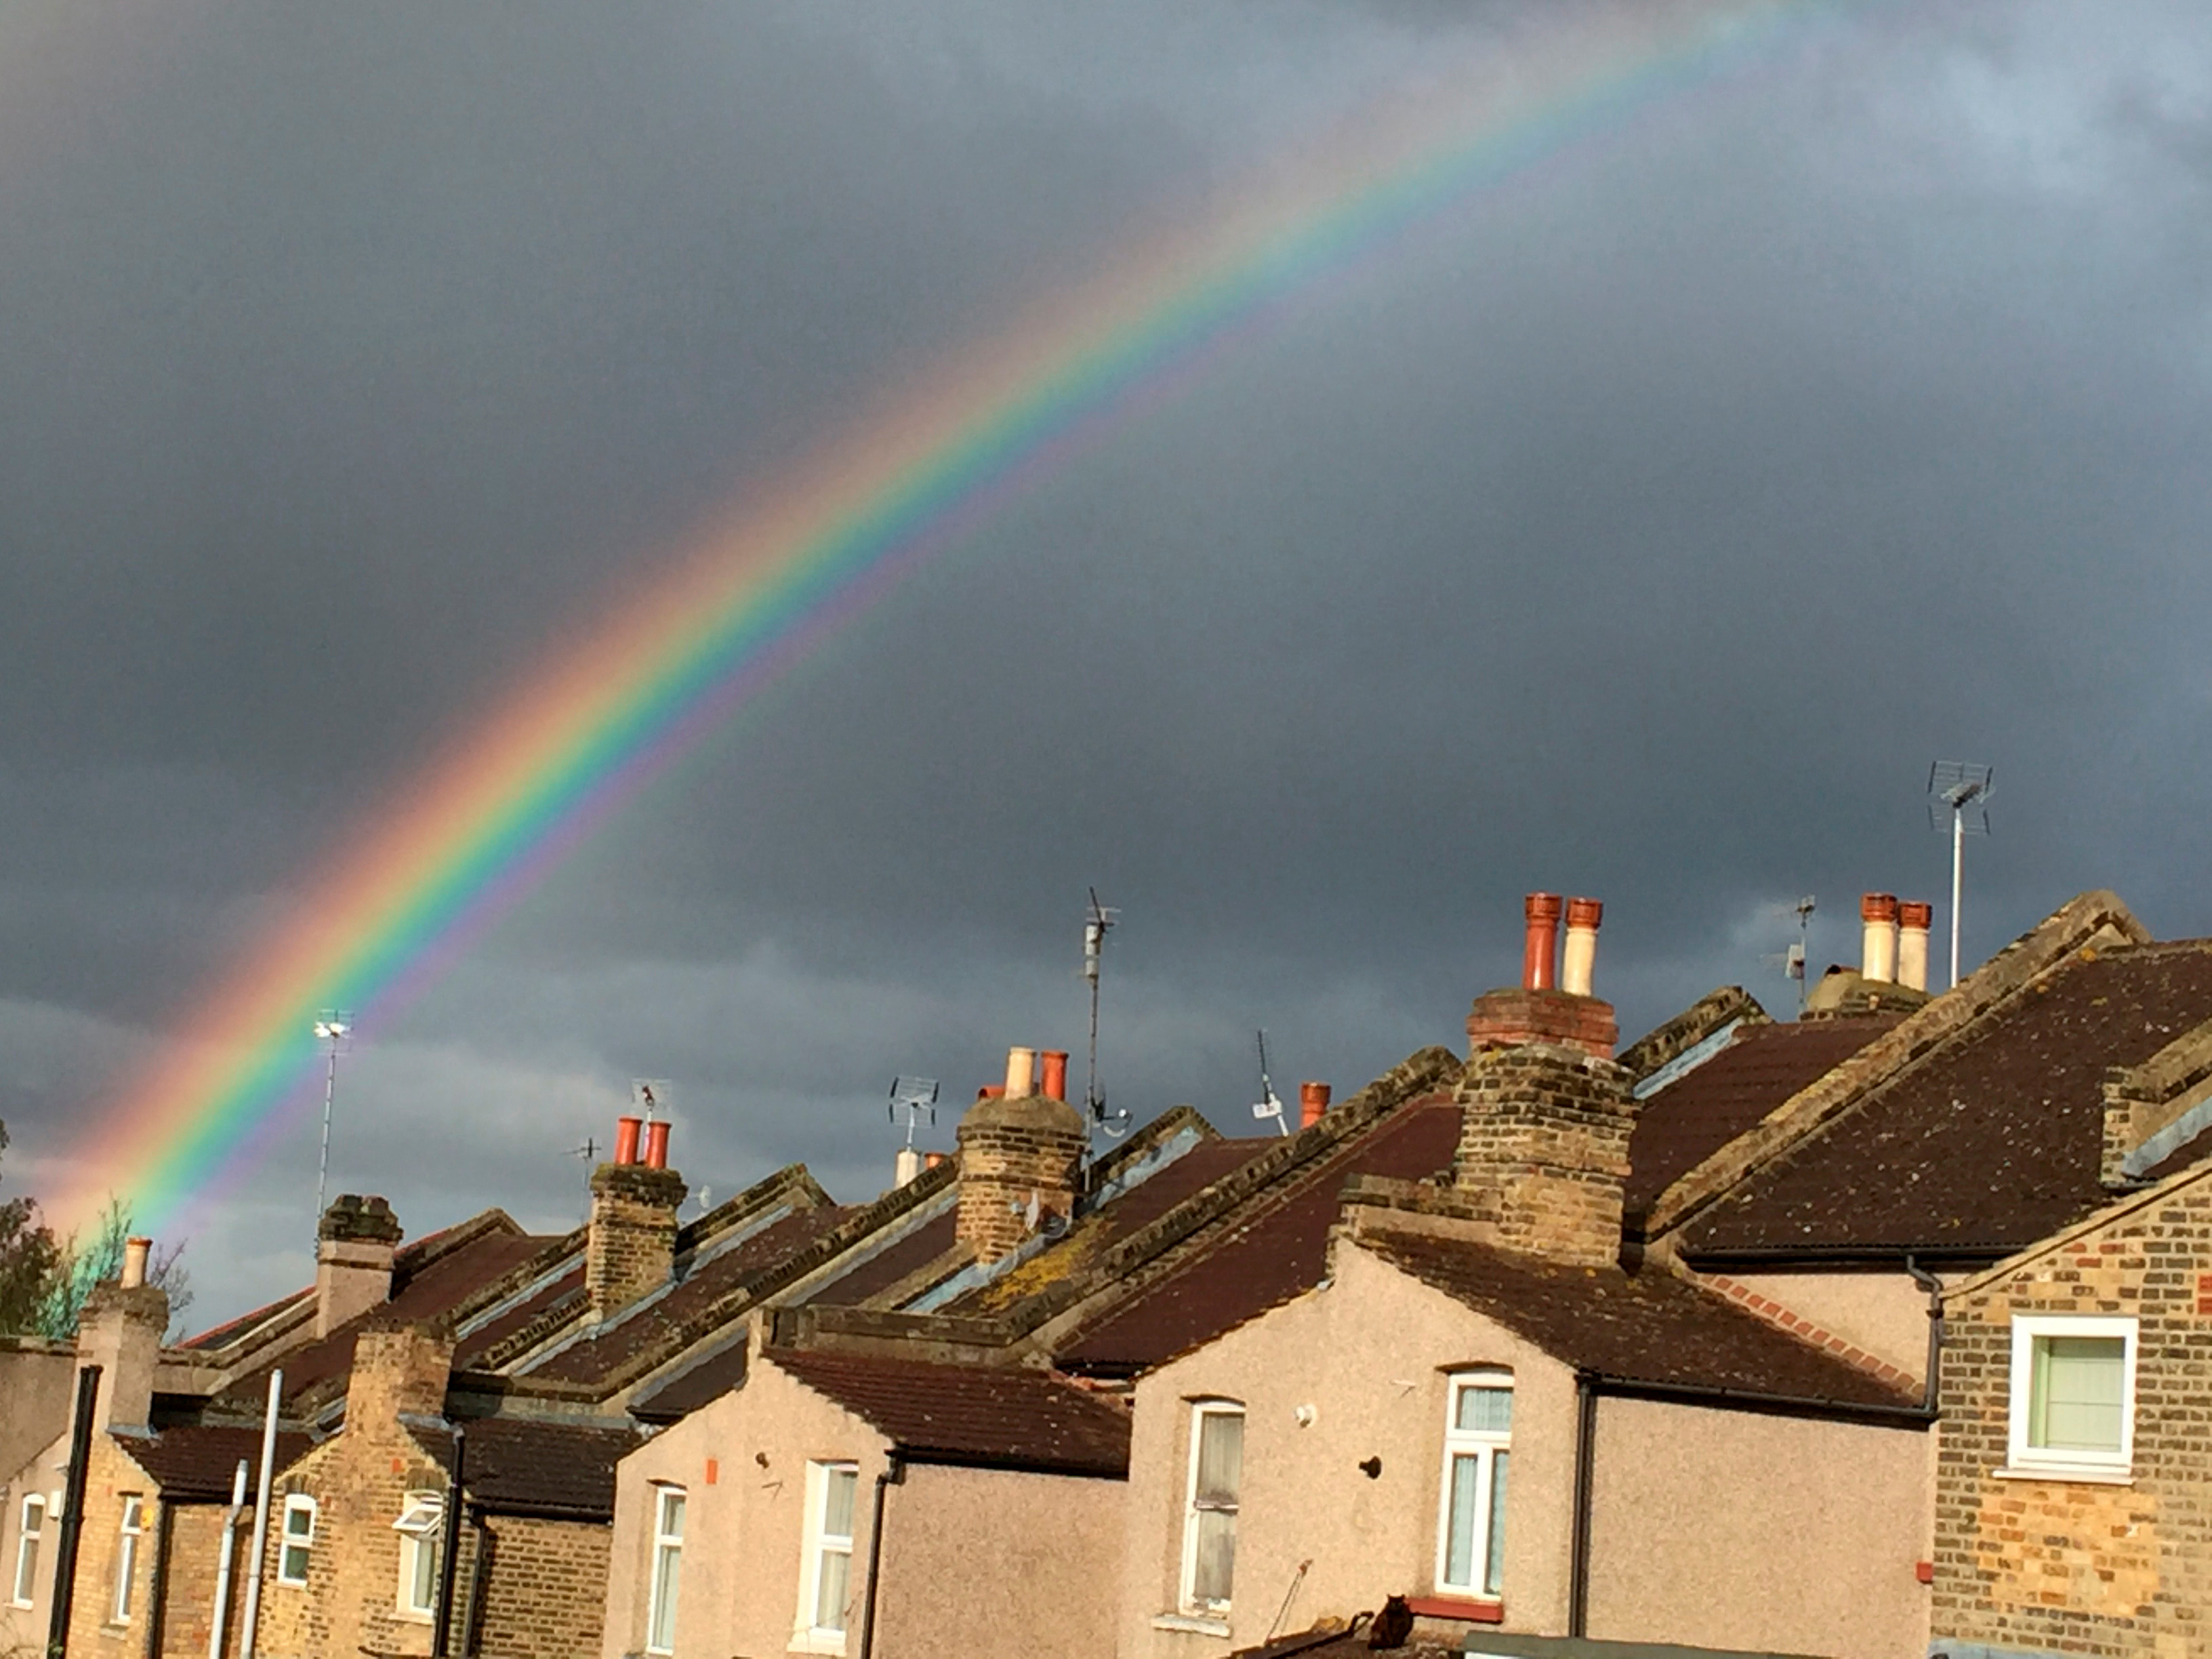 A rainbow forms over terraced housing during a rain storm in south London